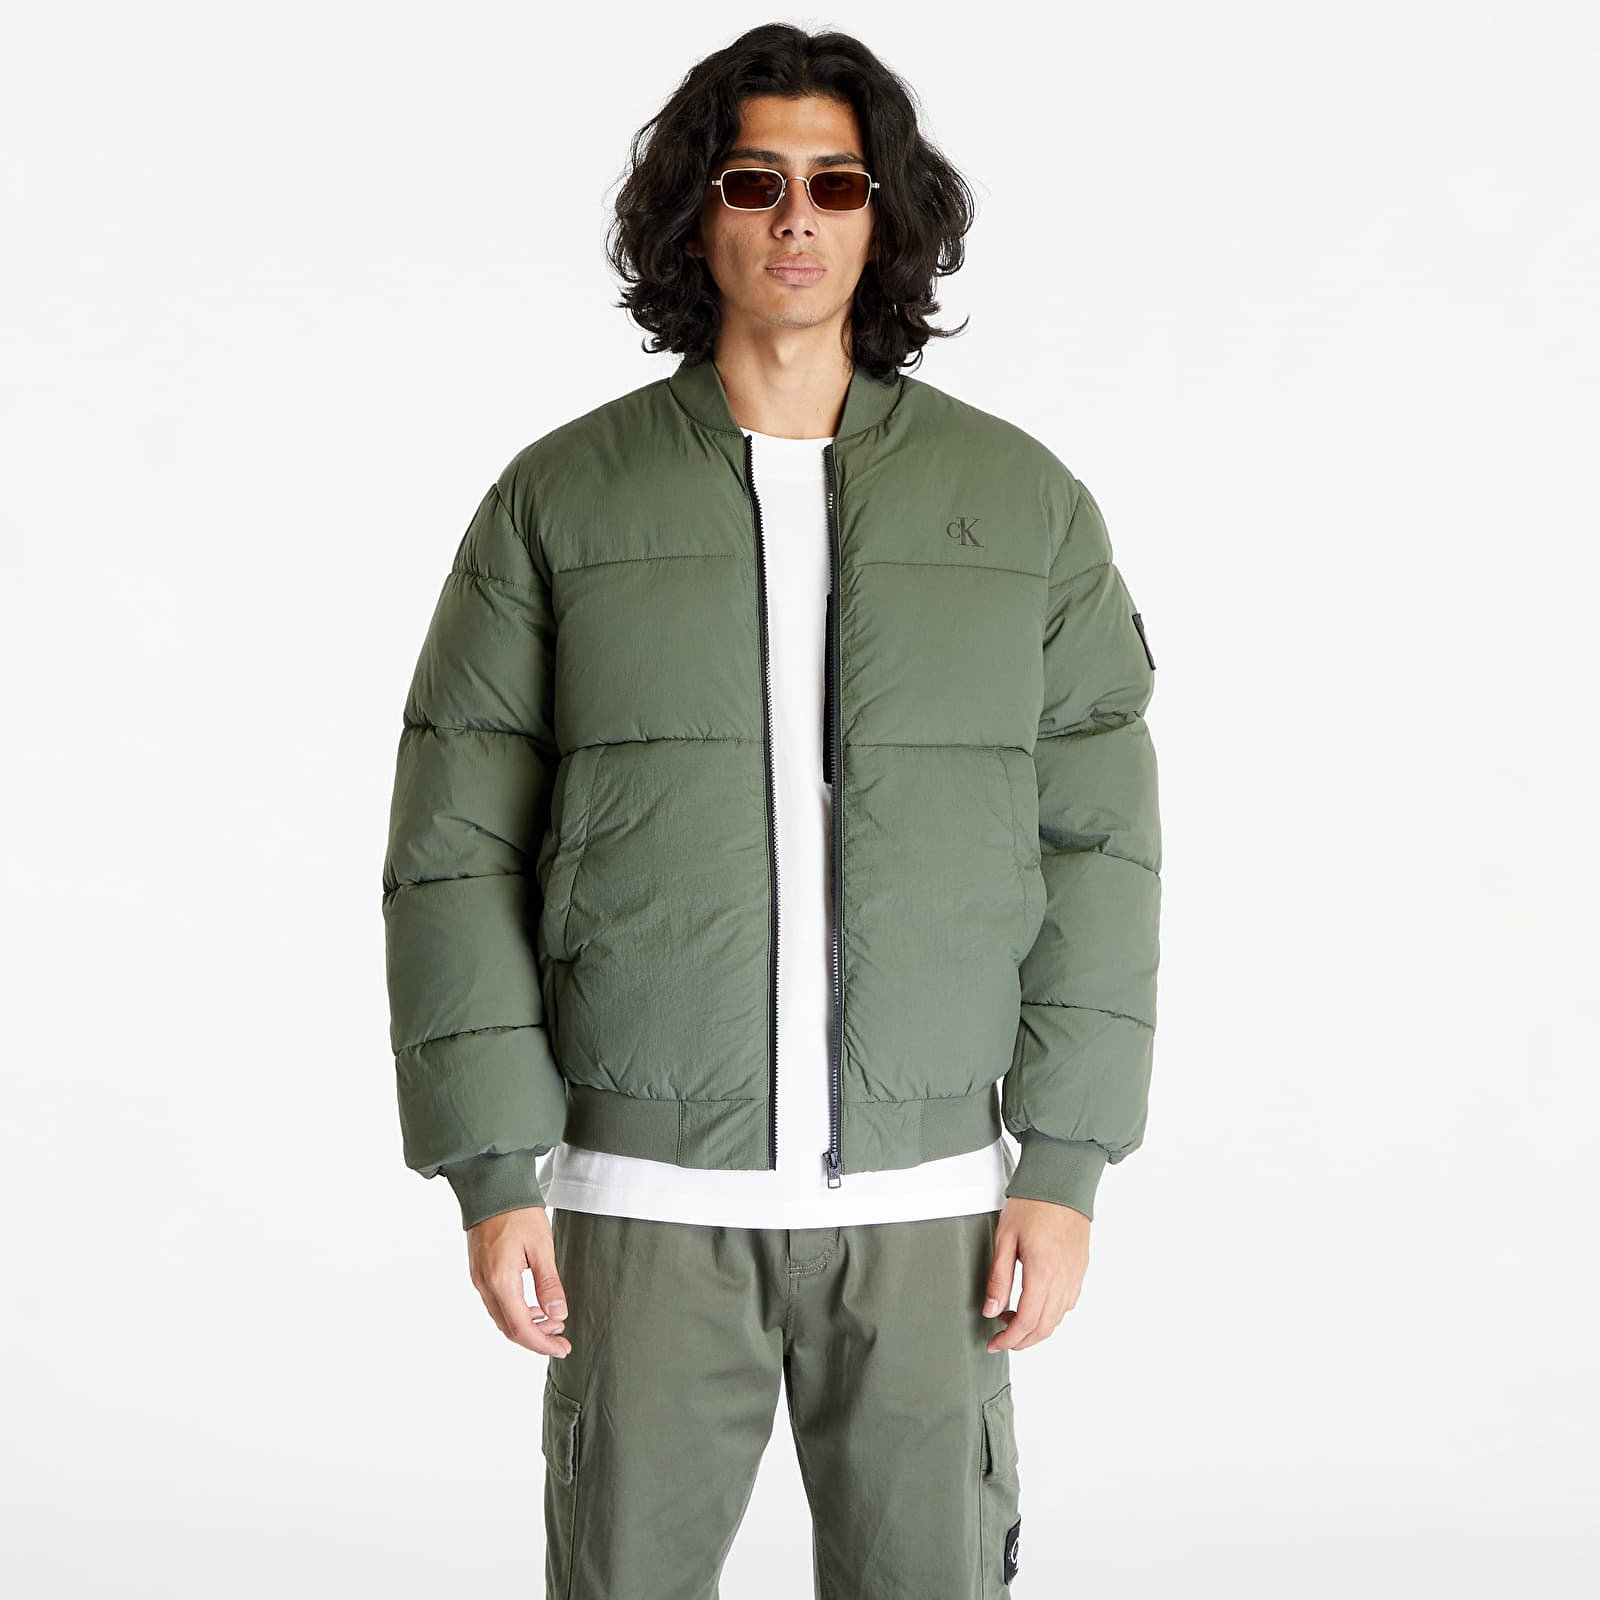 Jeans Commercial Bomber Jacket Green